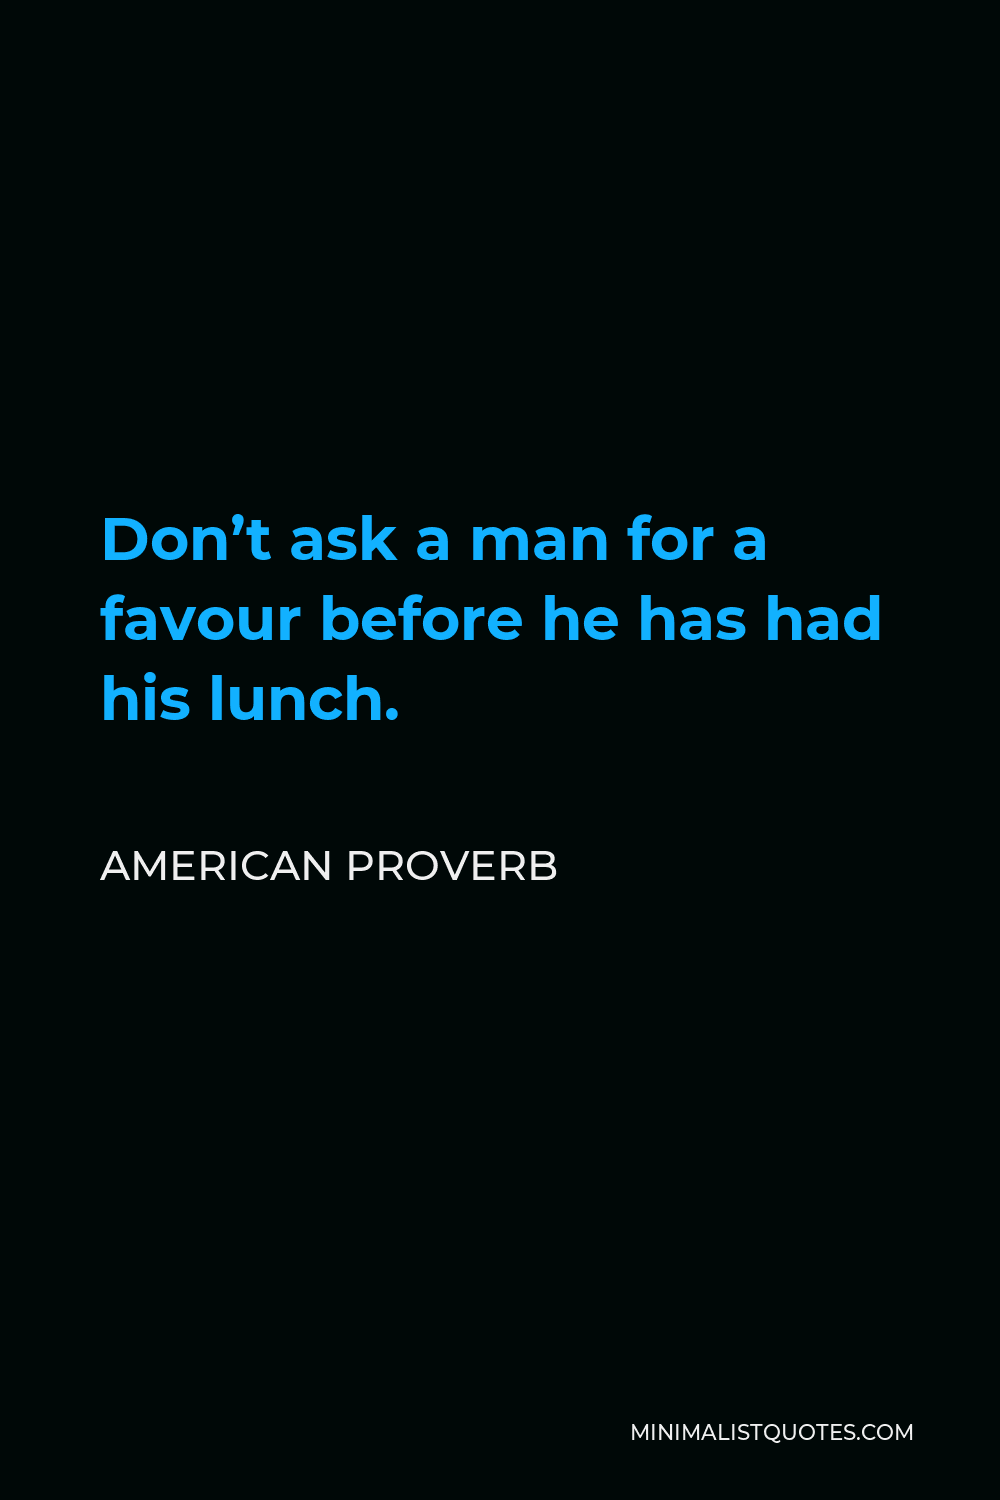 American Proverb Quote - Don’t ask a man for a favour before he has had his lunch.